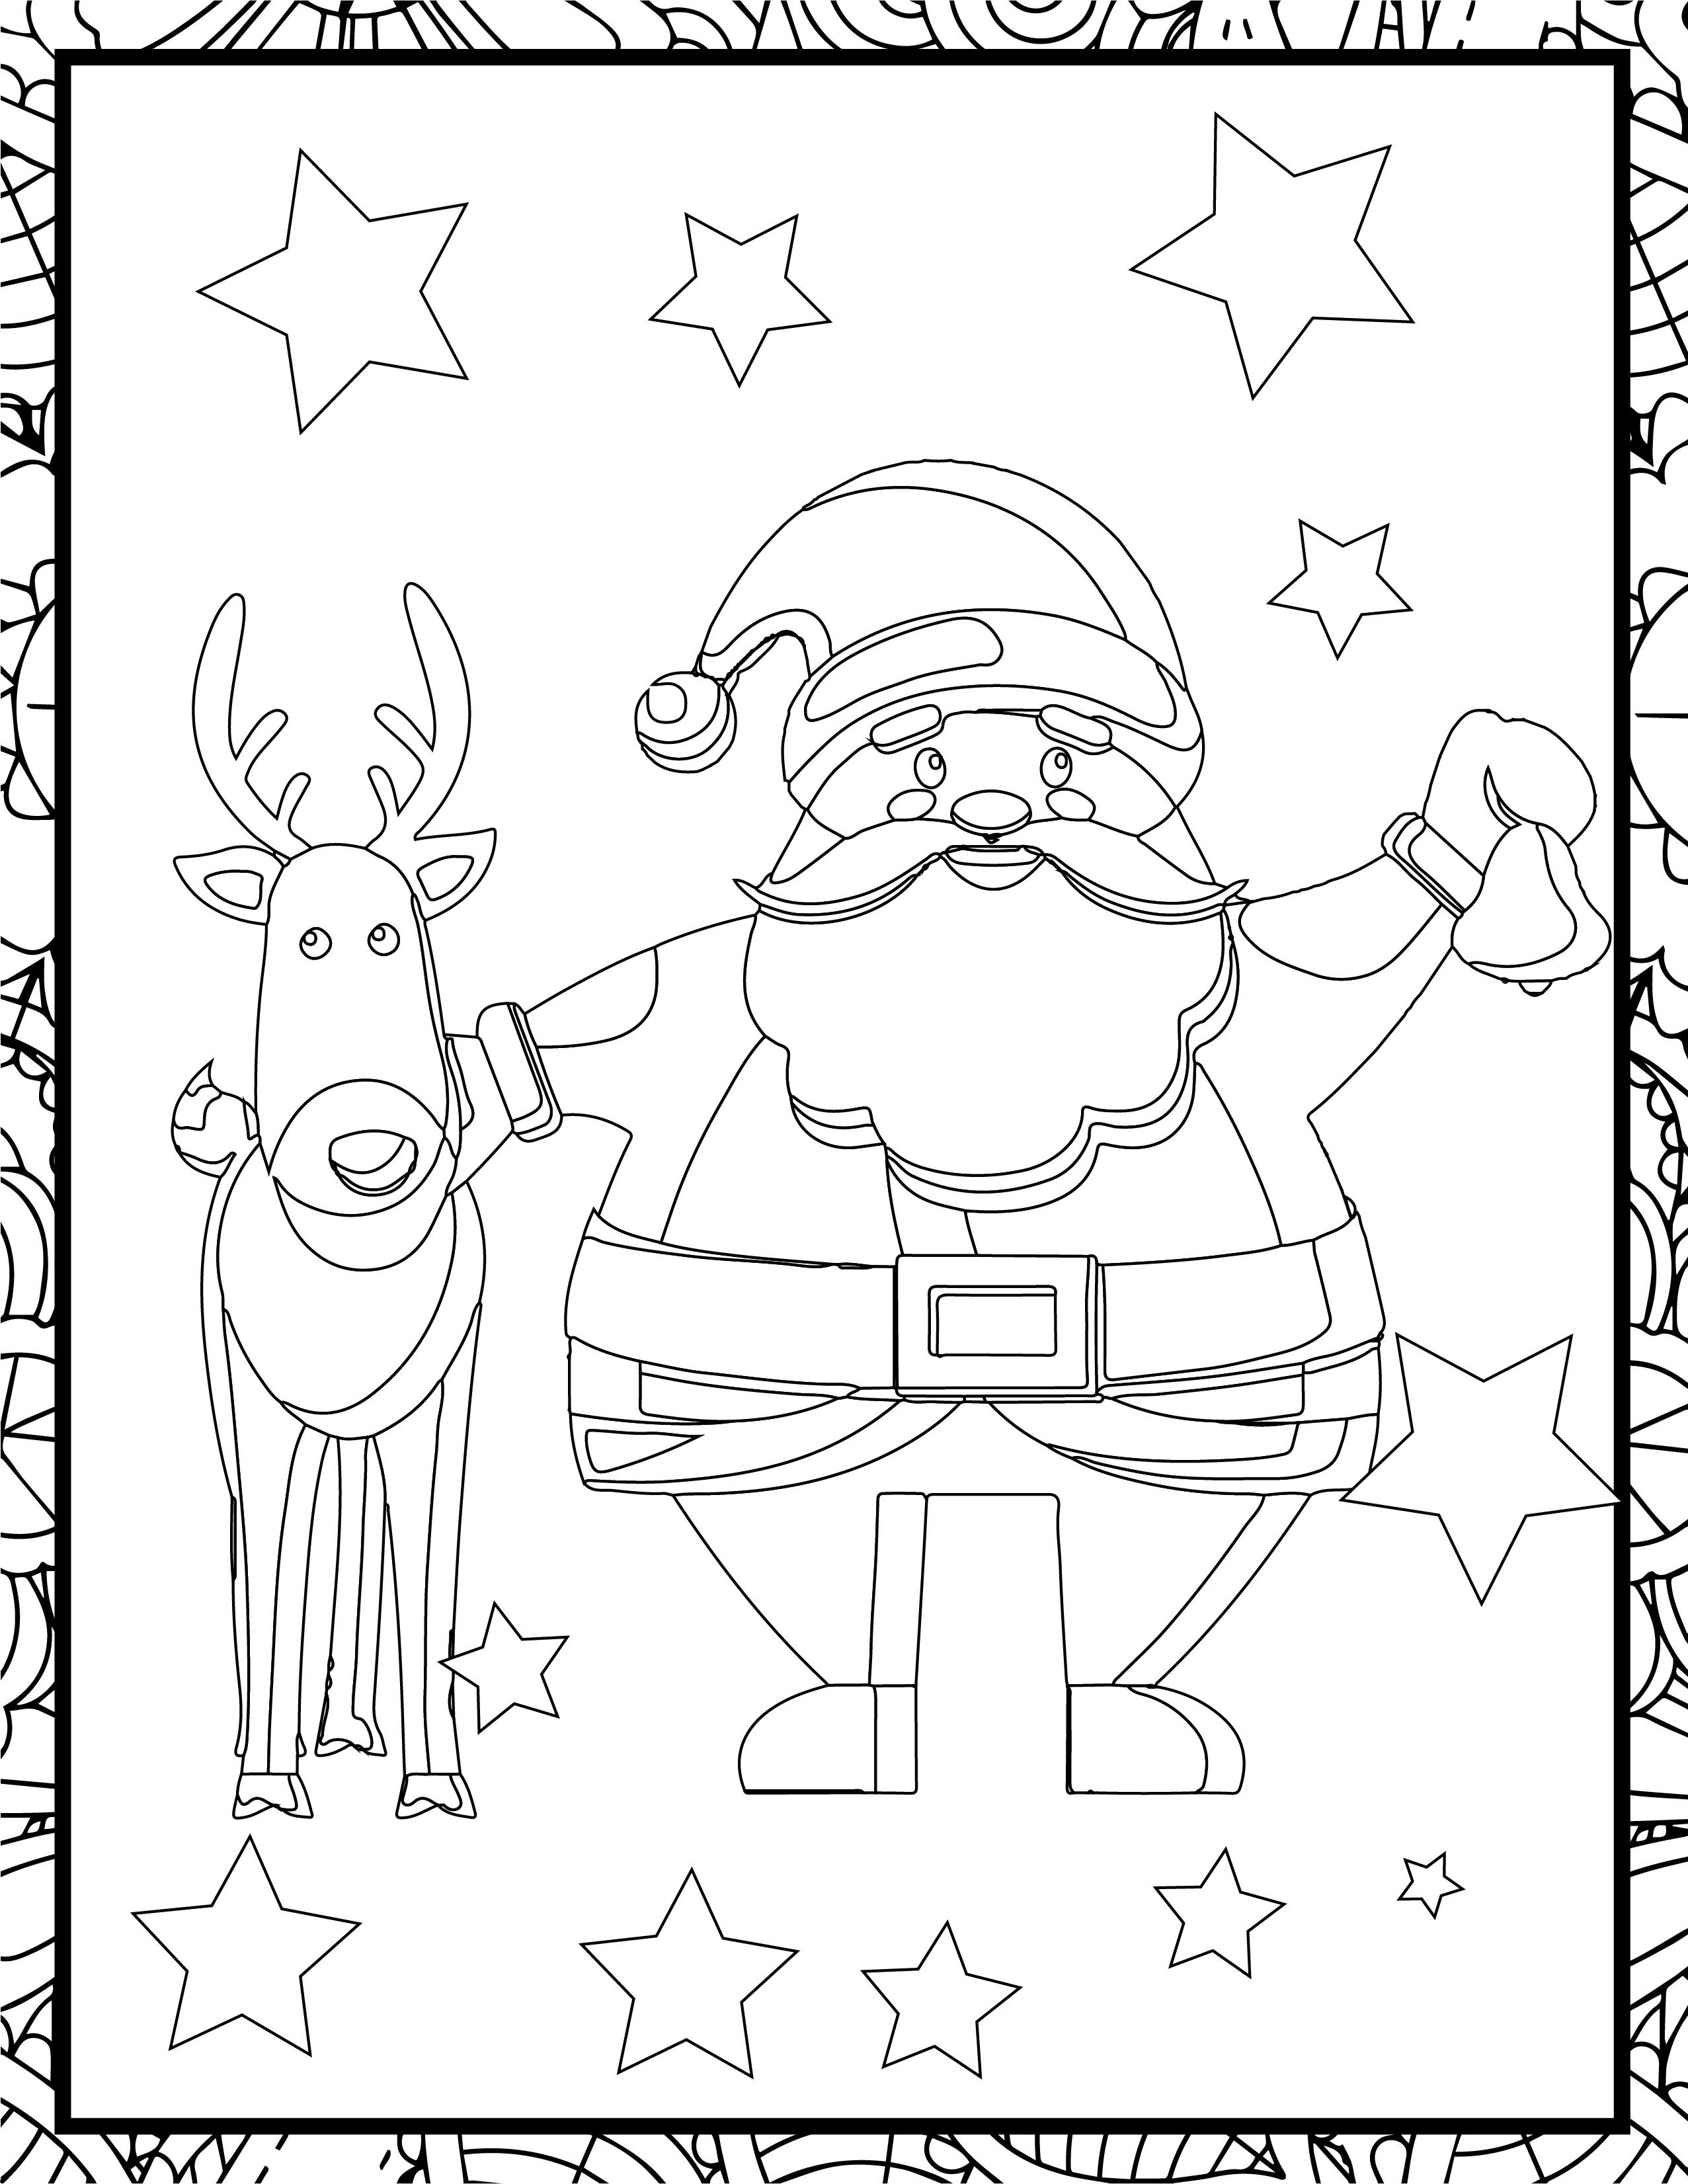  easy christmas coloring pages